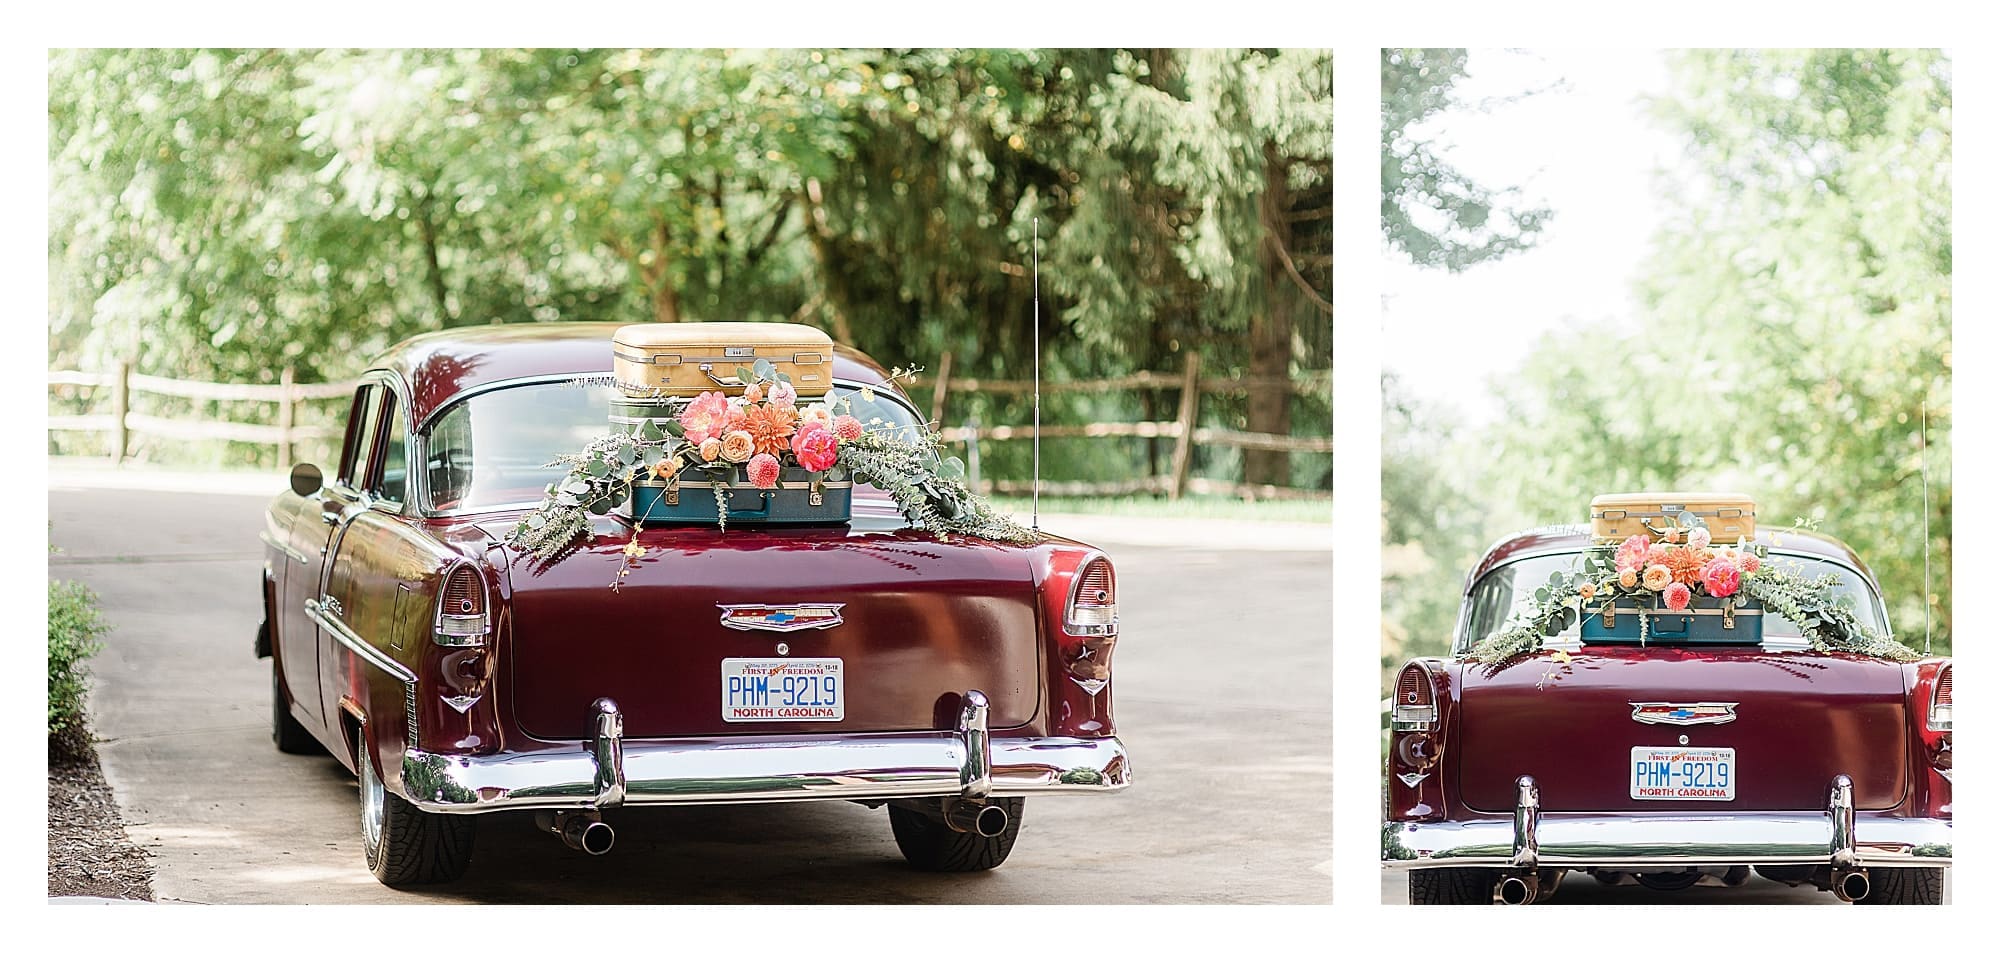 Dark red old fashioned car with suitcases sitting on top of trunk with peach, pink and orange wedding flowers on top